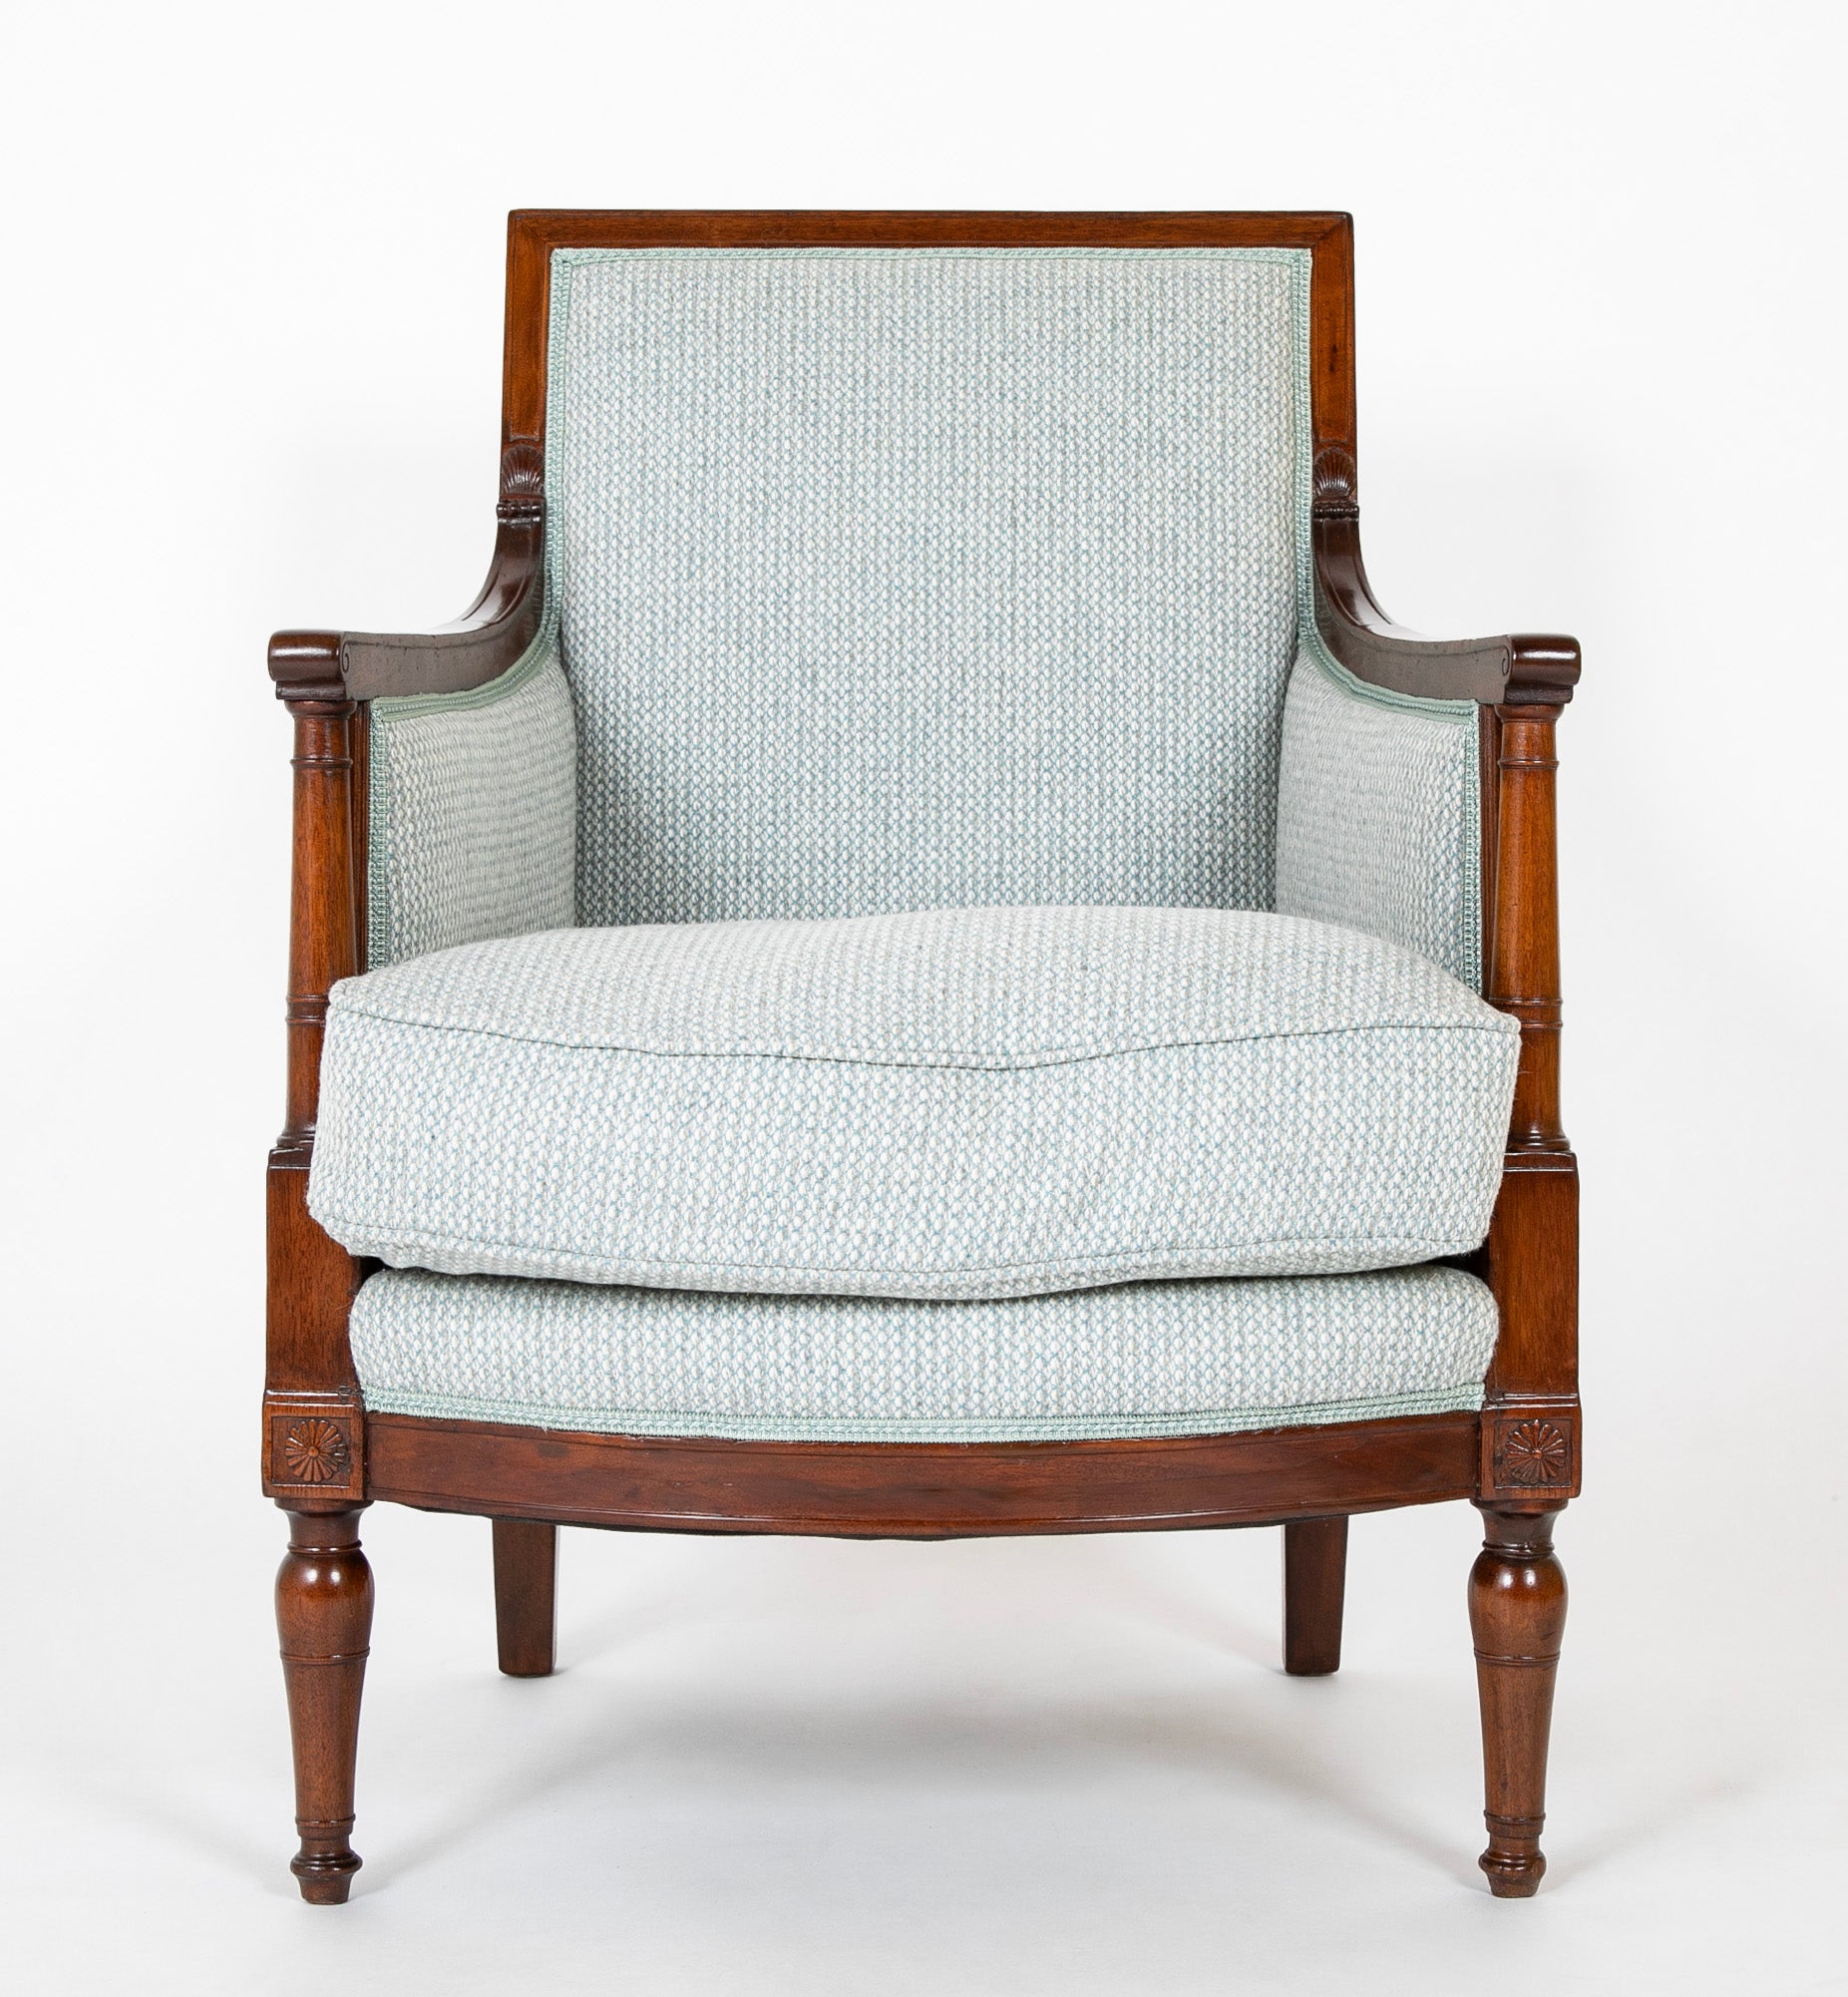 18th Century French Directoire Mahogany Armchair Stamped  'De May / Rue de Clery'